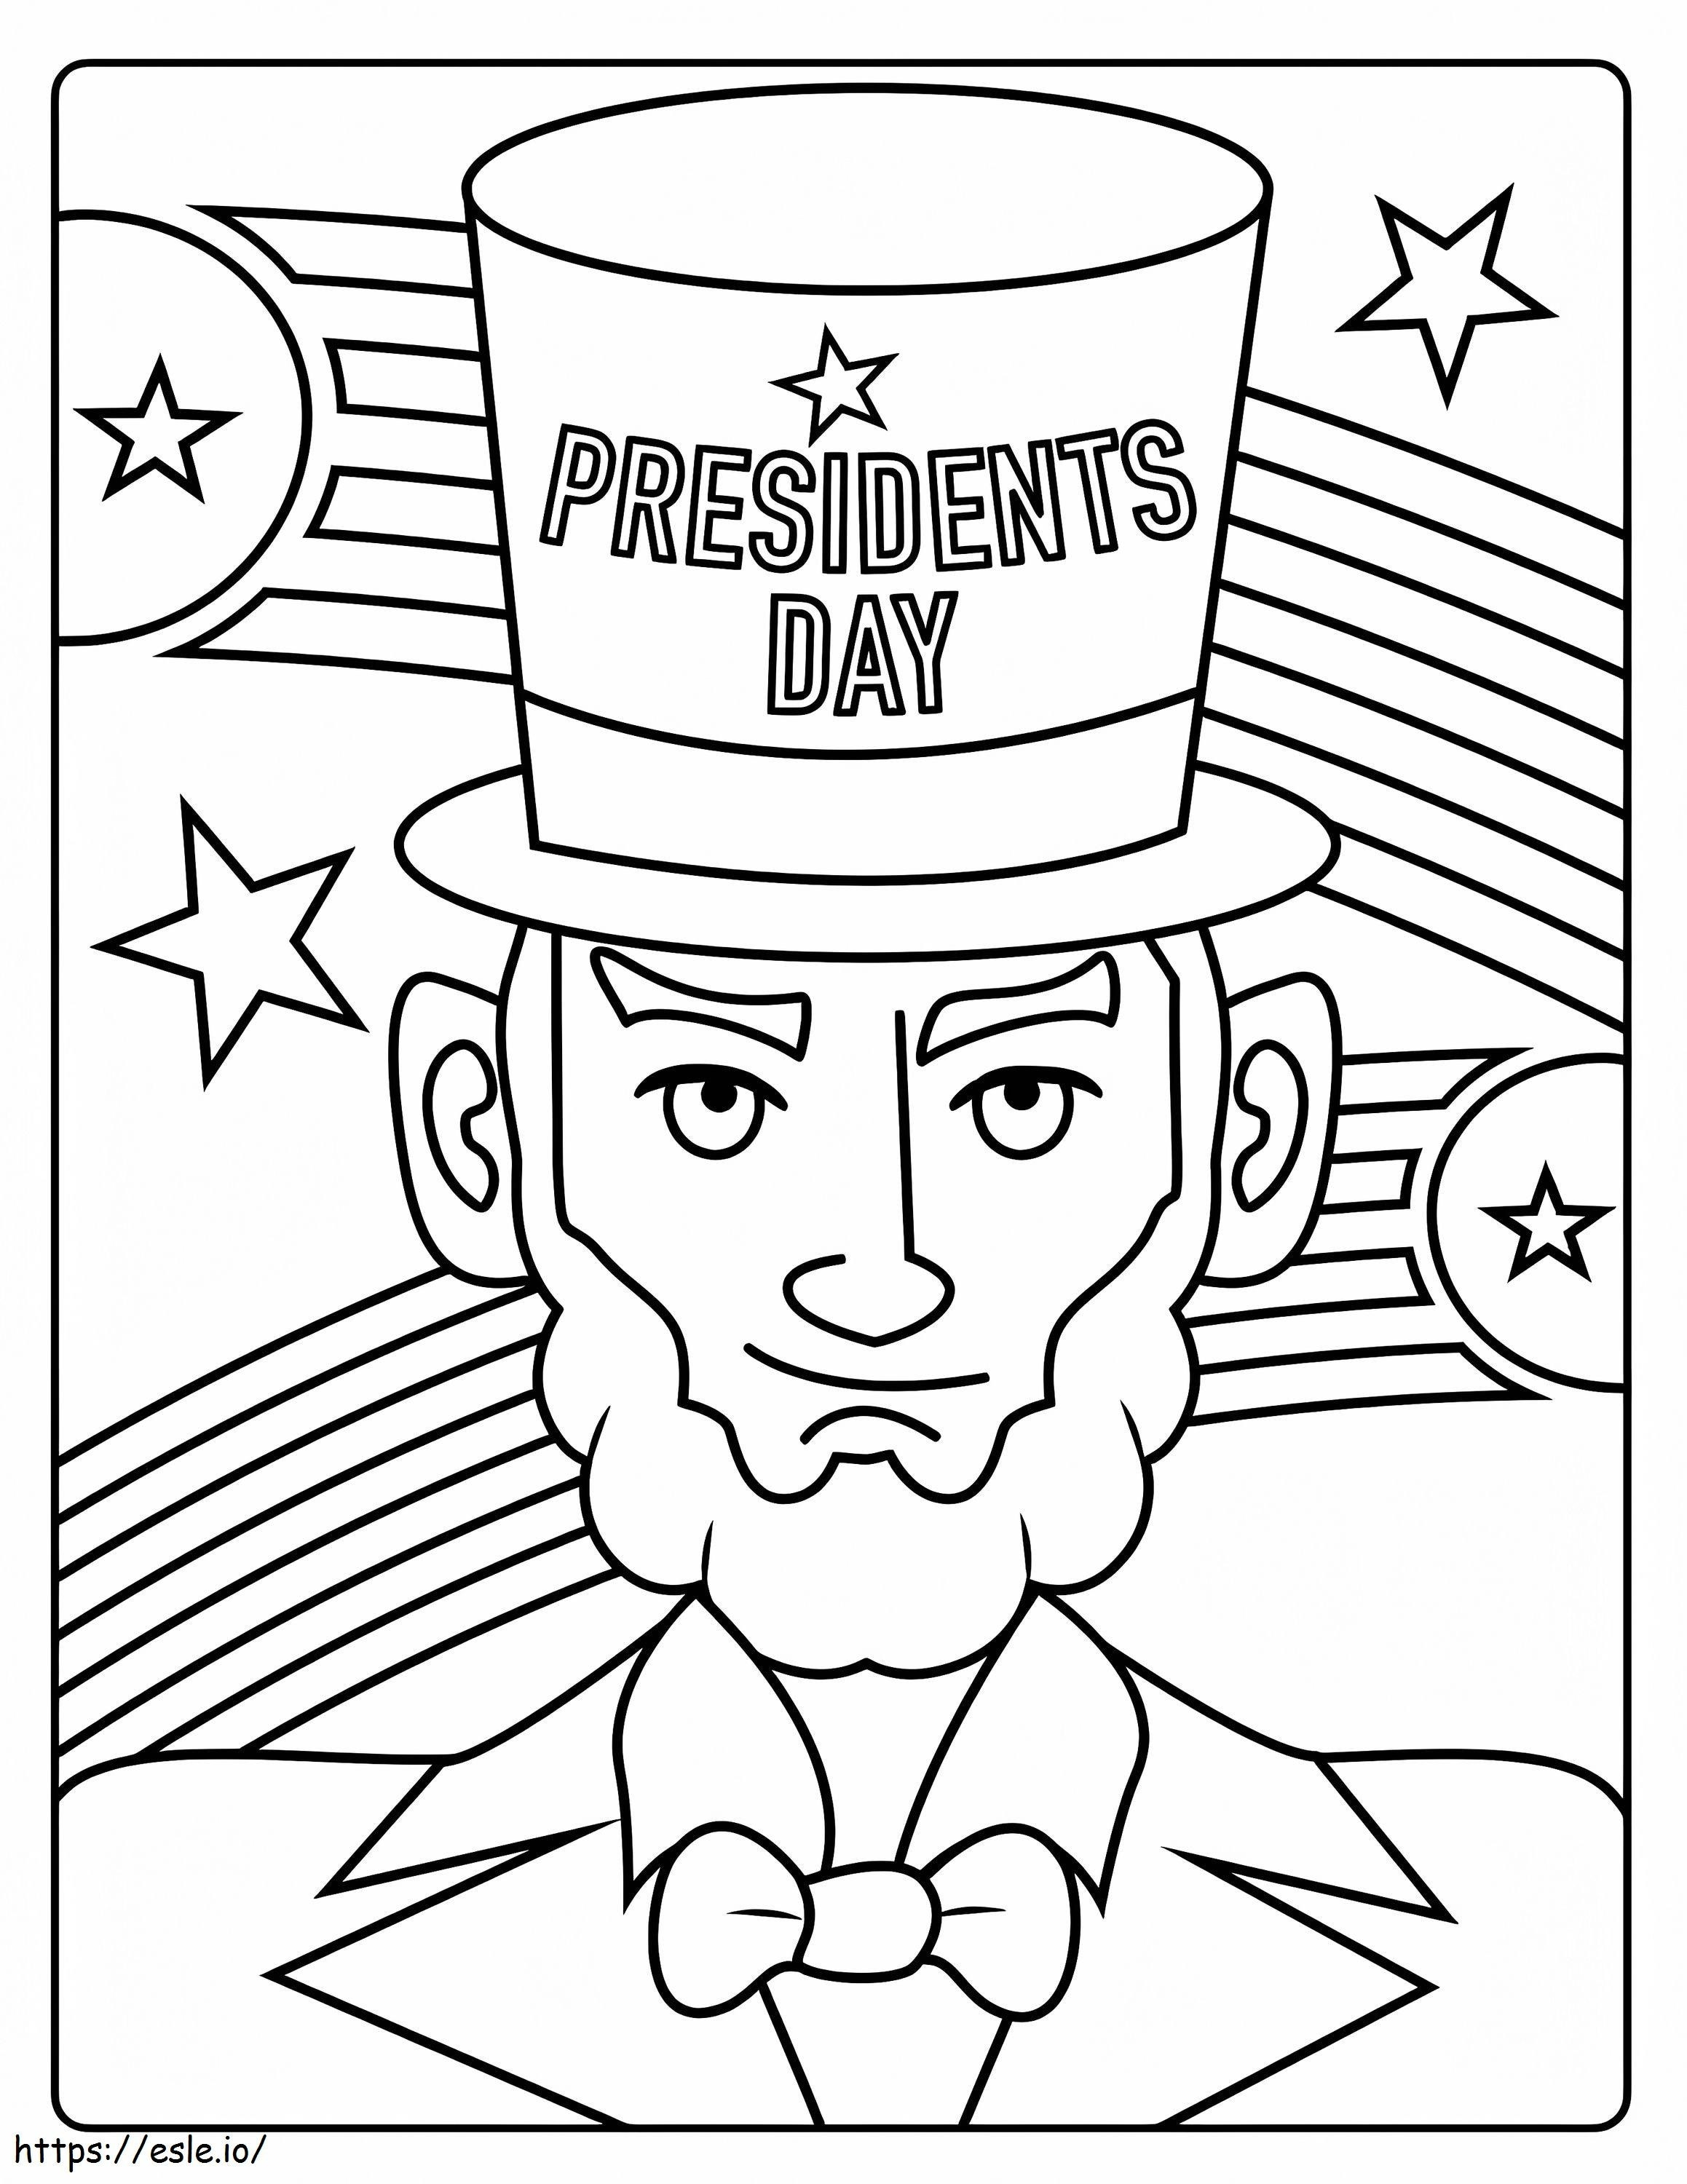 Presidents Day 8 coloring page